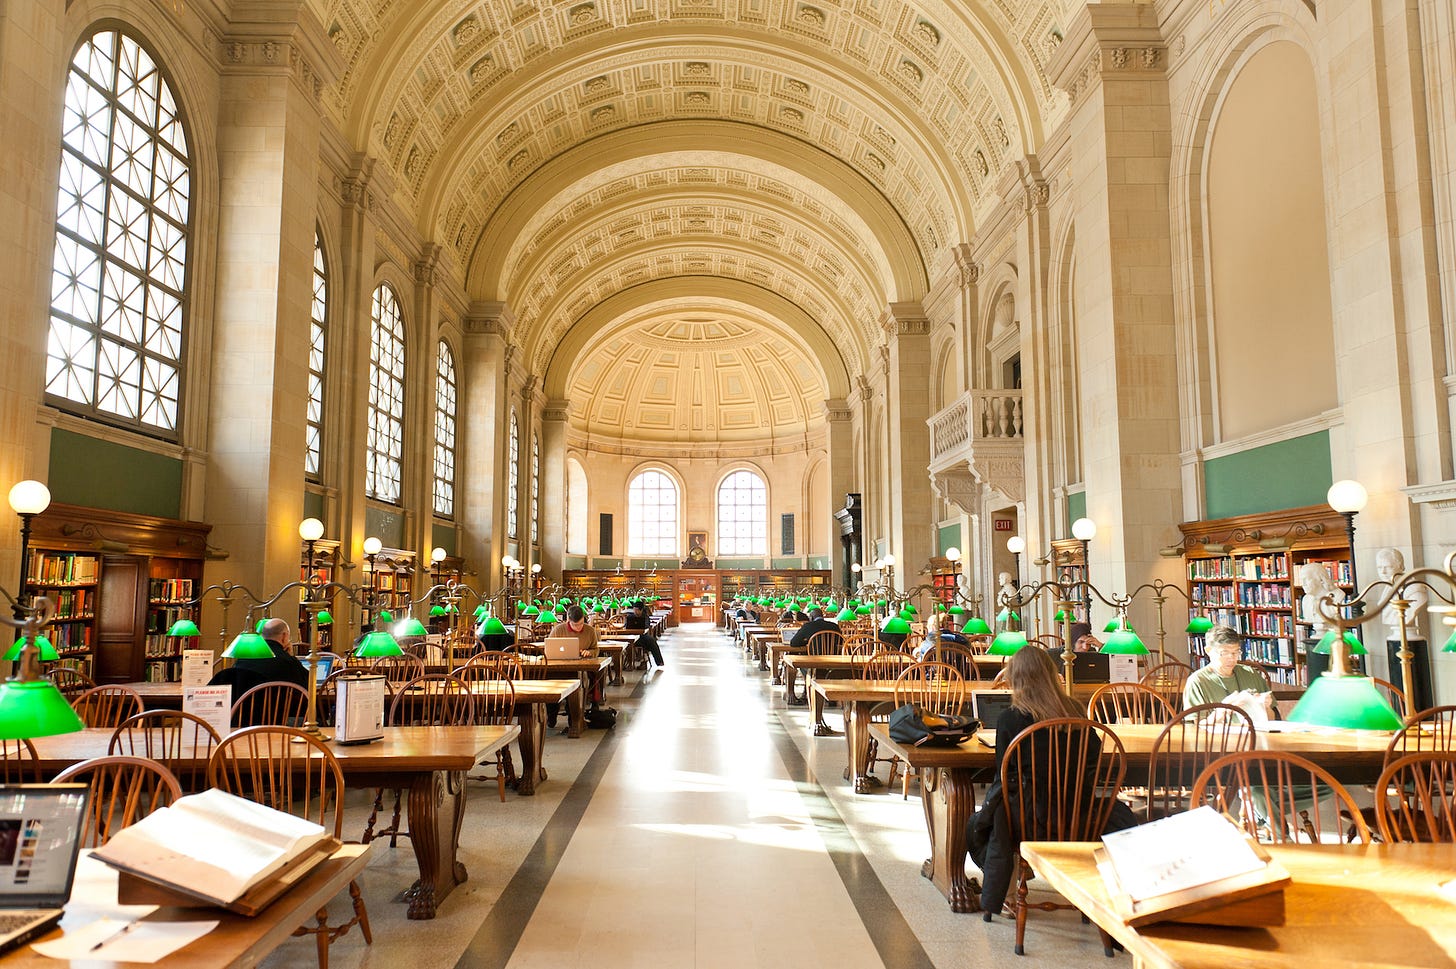 The Reading Room at the Boston Public Library: a vaulted space with rows of reading tables and green lamps